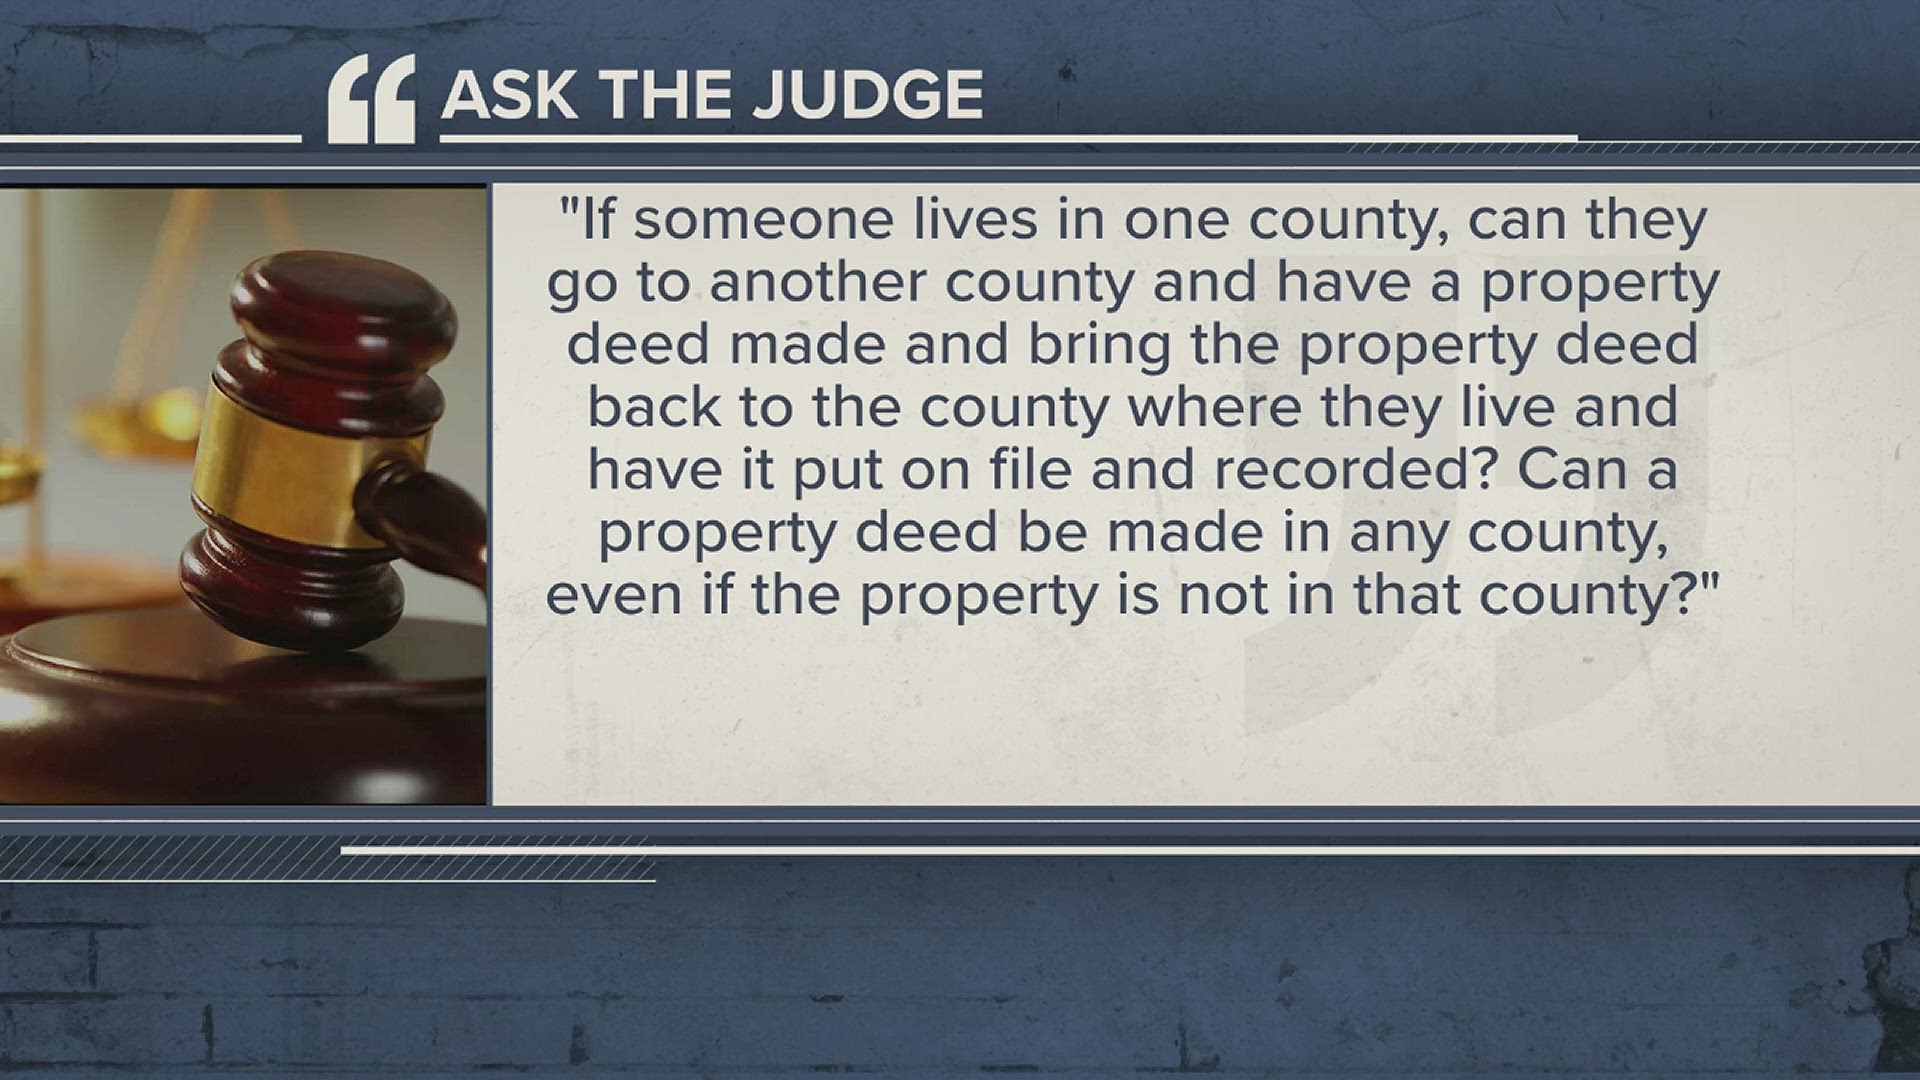 Submit your legal questions at 12NewsNow.com/askthejudge.